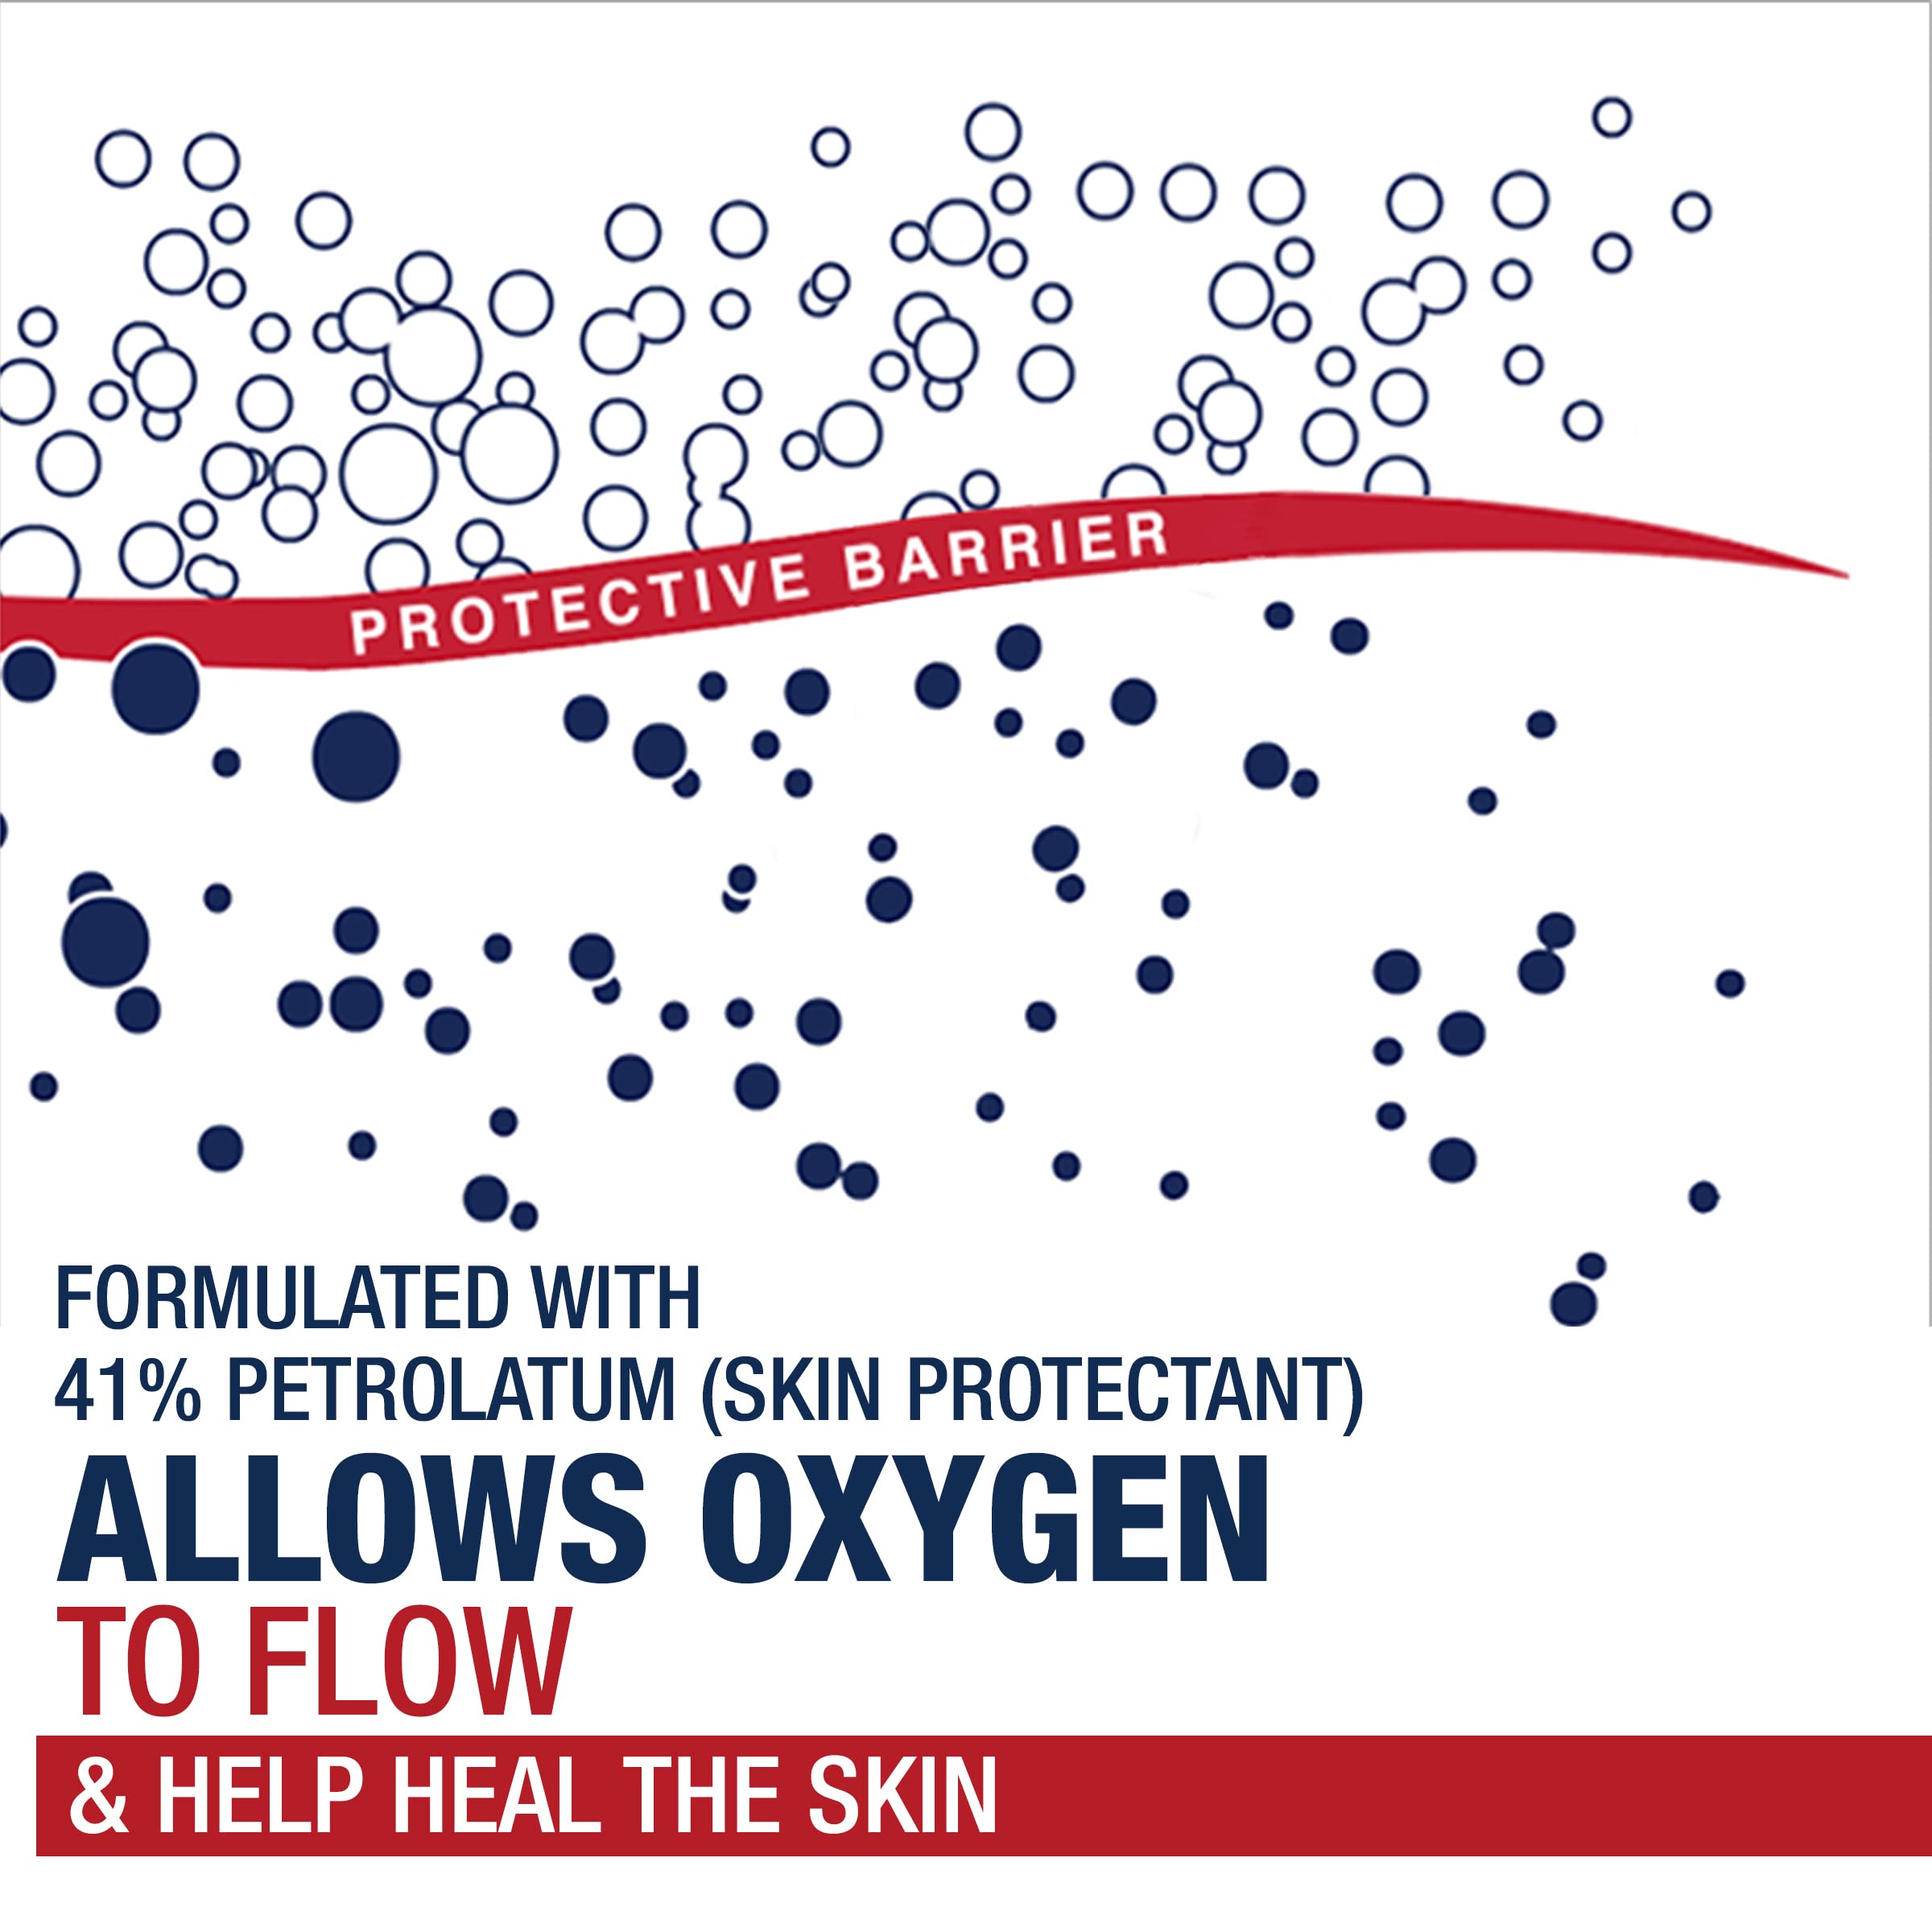 Aquaphor Healing Ointment - Travel Size Protectant for Cracked Skin - Dry Hands, Heels, Elbows, Lips, Packaging May Vary, 1.75 Ounce (Pack of 3)